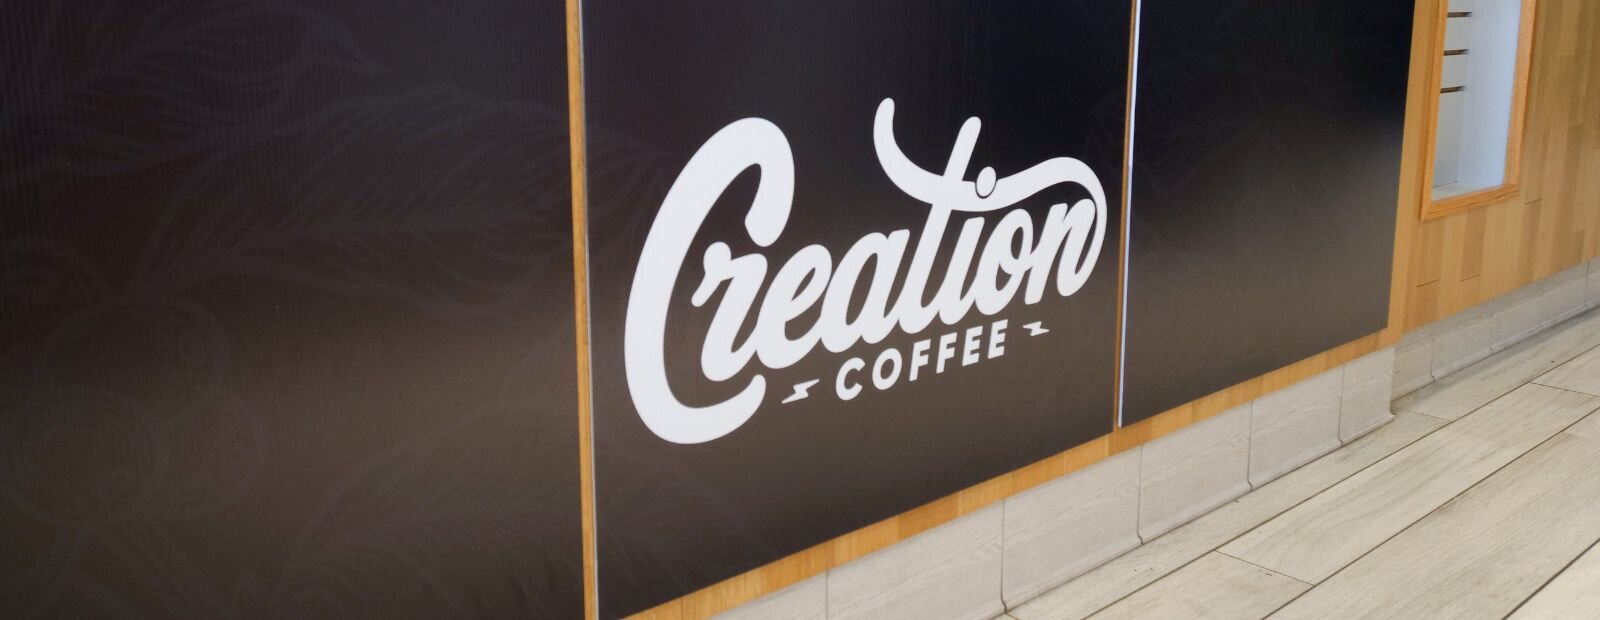 Formerly the location of Smoothie King, Creation Coffee is the new tenant of Unit A in the Campus Commons plaza on Mission Street.